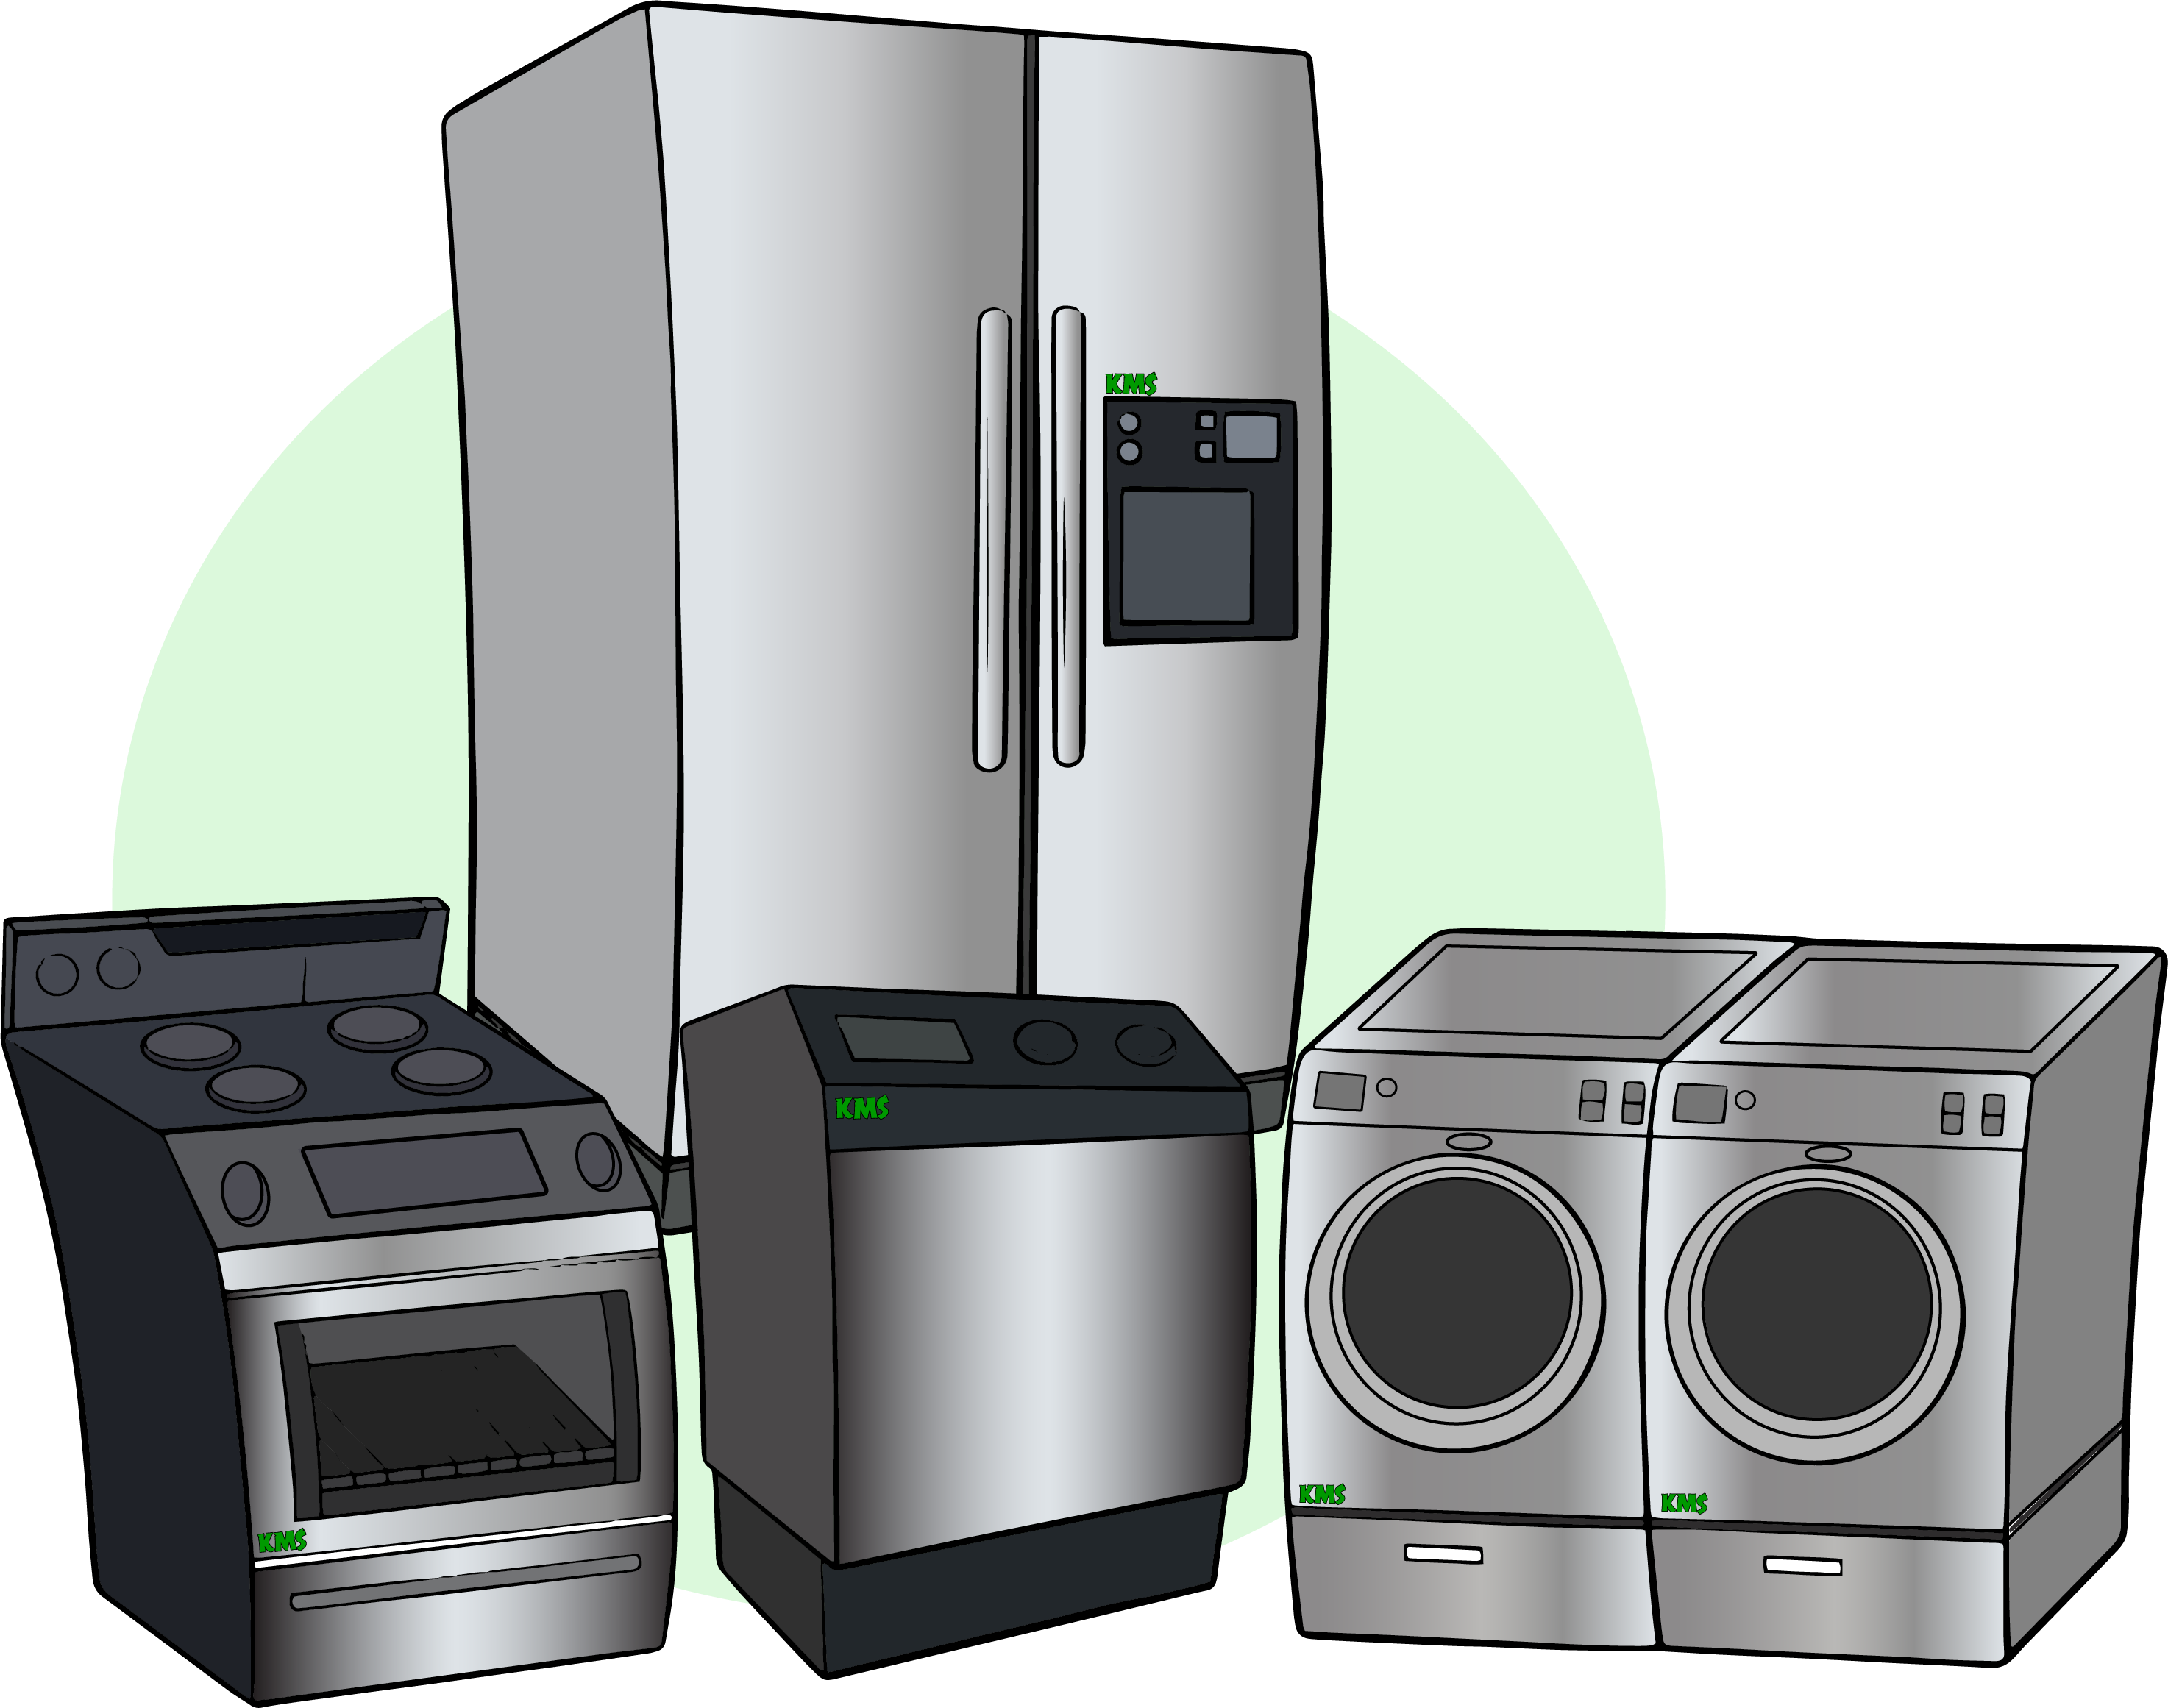 Bosch appliance repair service in montreal